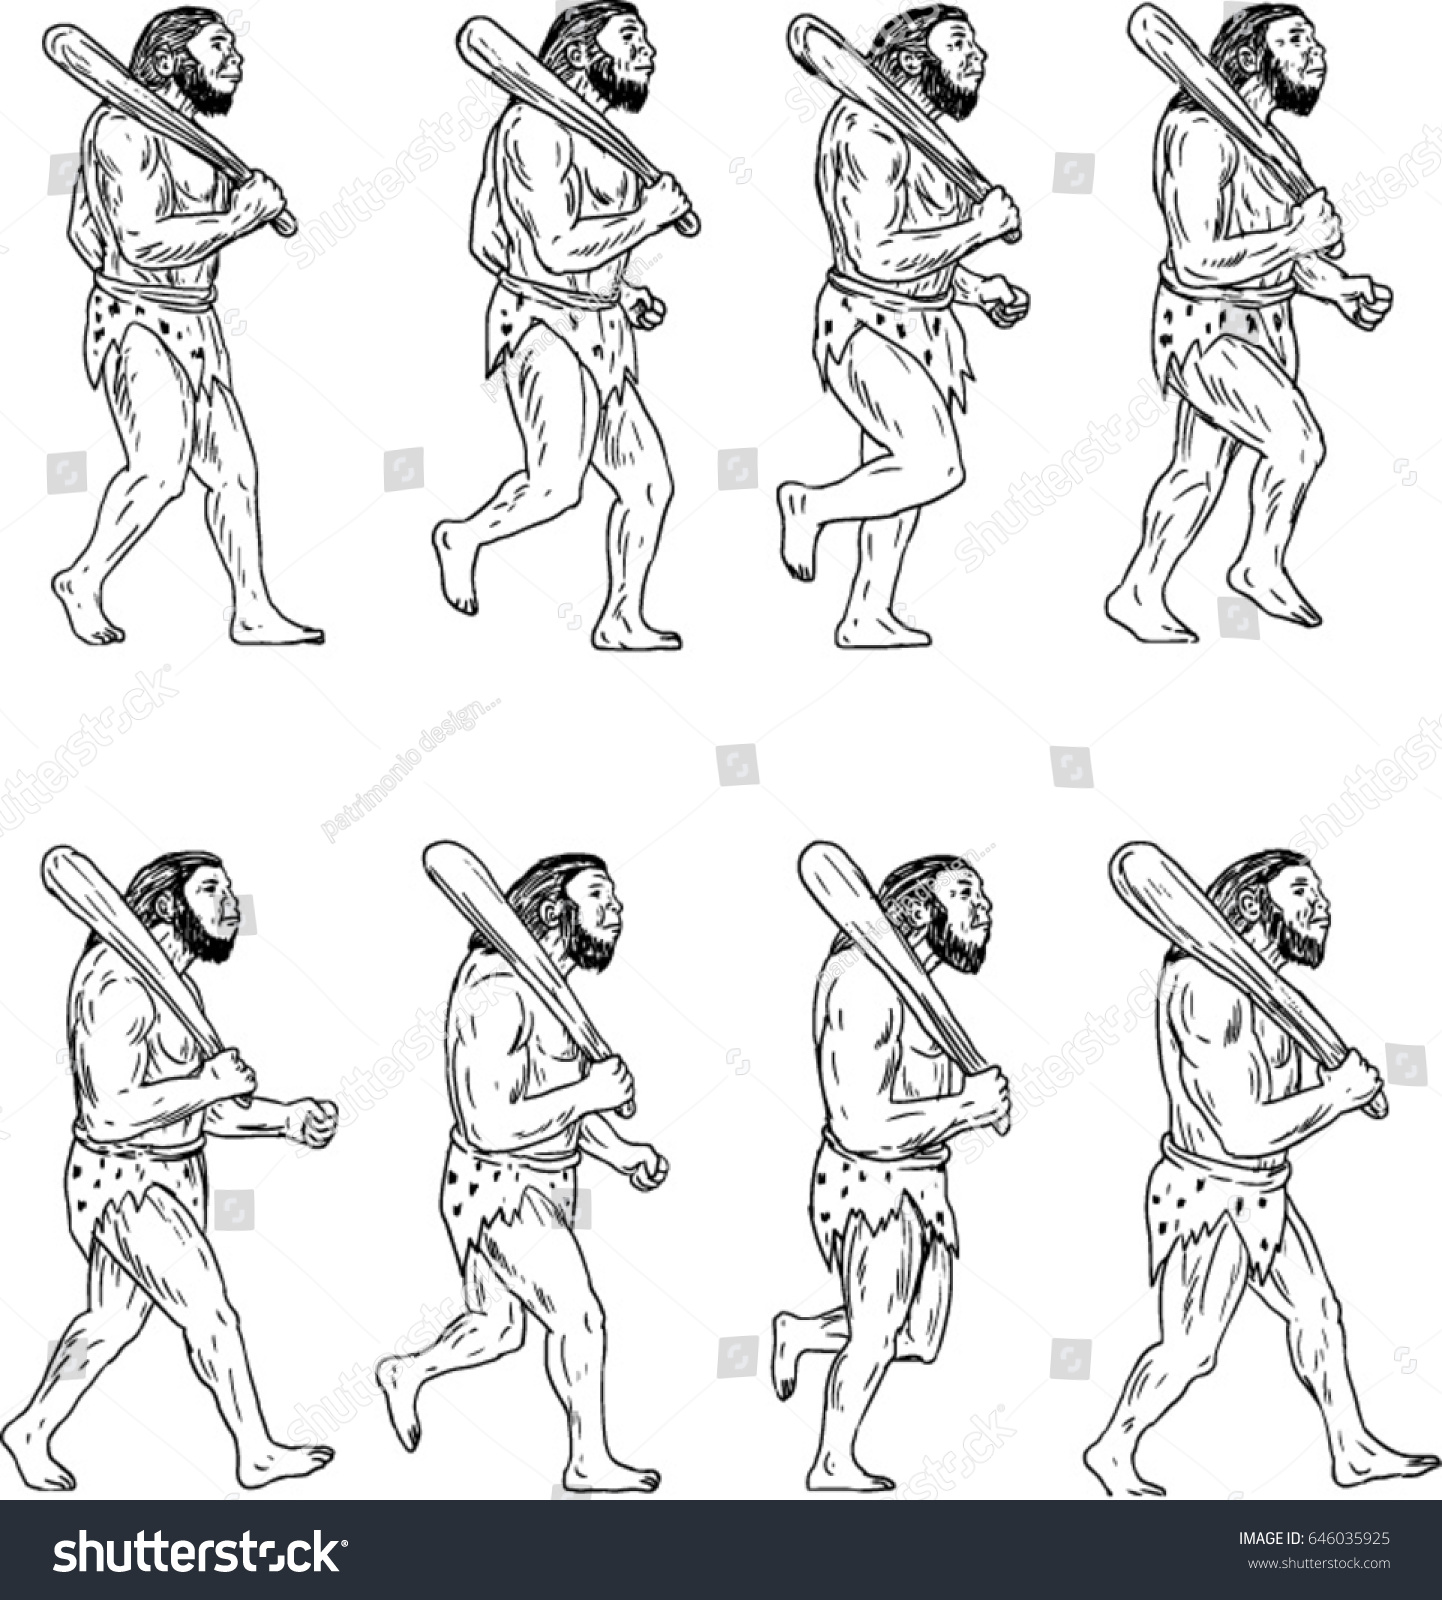 SVG of Collection set of illustrations of a neanderthal man or caveman holding a club on shoulder walking showing a walk cycle viewed from the side.  svg